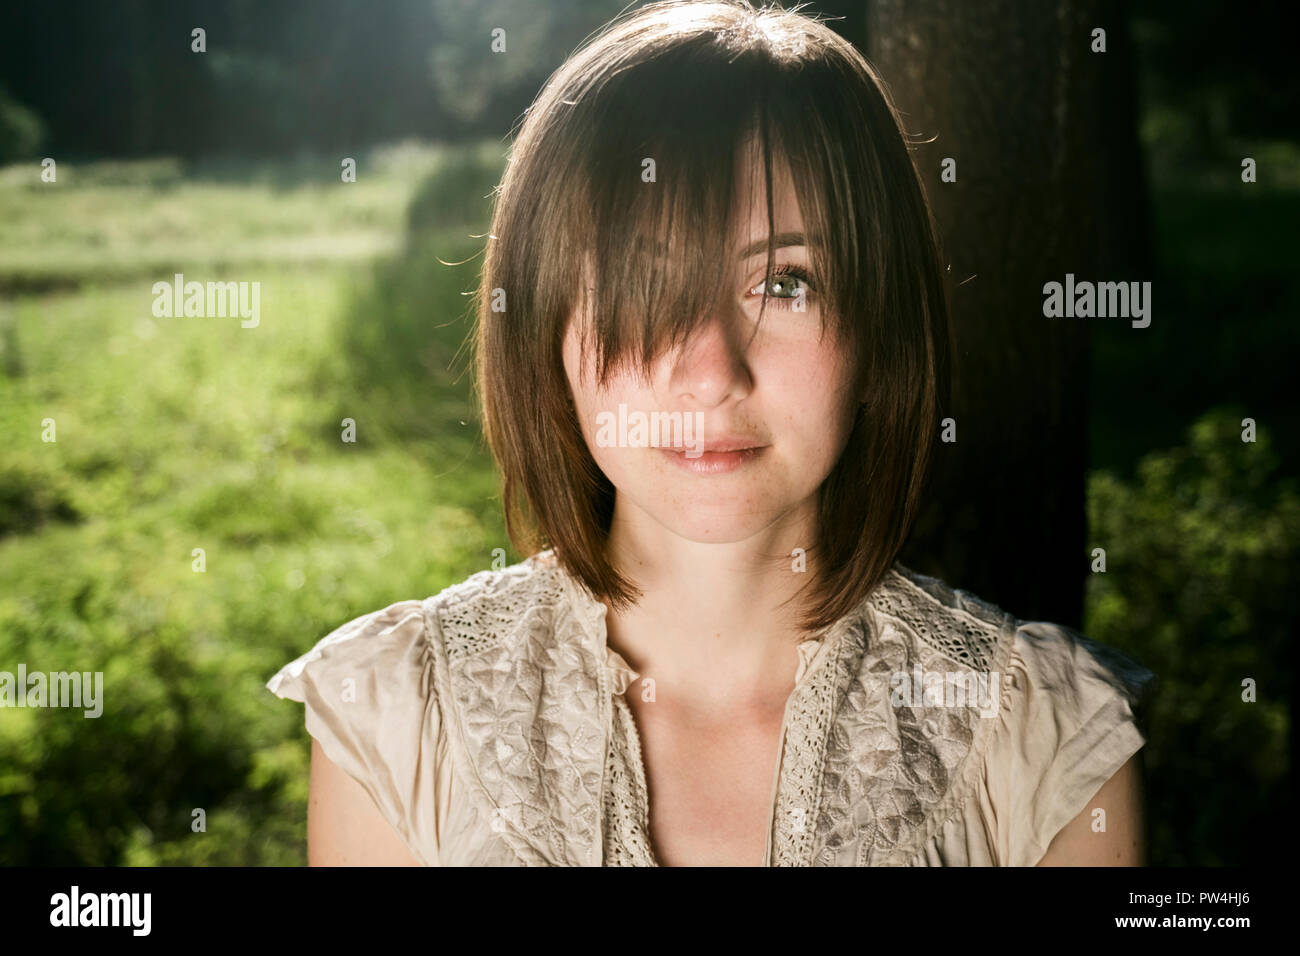 Portrait of young woman with bangs in forest Stock Photo